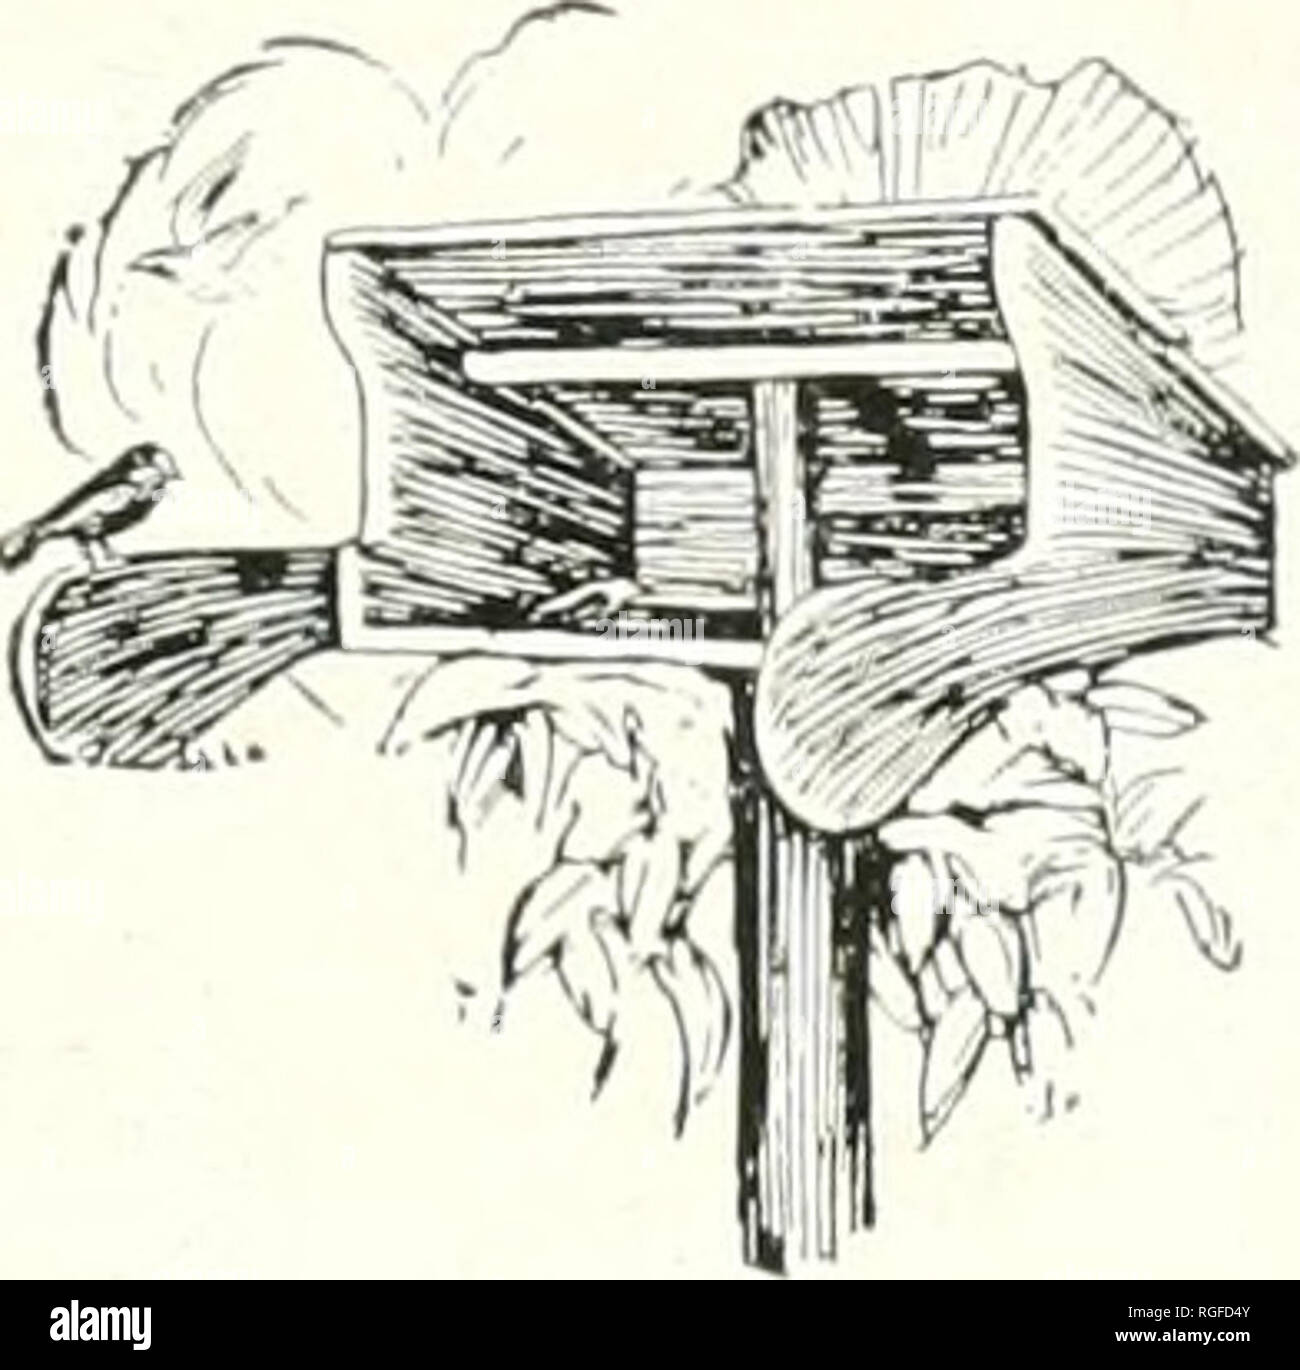 . The Bulletin of the Massachusetts Audubon Society. Birds; Nature conservation. Wren Houses, solid oak. cypress shingles, copper copinsr, 4 com- partments, 28 inches high, 18 inches dia. Price $6.00 FREE Mr. Dodson's fascinatinc booklet, &quot;Your Bini Friends and How to Win Them,&quot; with all the styles of Bird Houses and Mr. Dodson's valuable suesrestions. A colored bird picture suitable for framing will also he sent free. Dodson's Sparrow Trap is guaranteed to rid your premises of this noisy, quarrelsome pest. $8.00 Bird houses that endure &quot;^^011 know the birds are ereatiires of ha Stock Photo